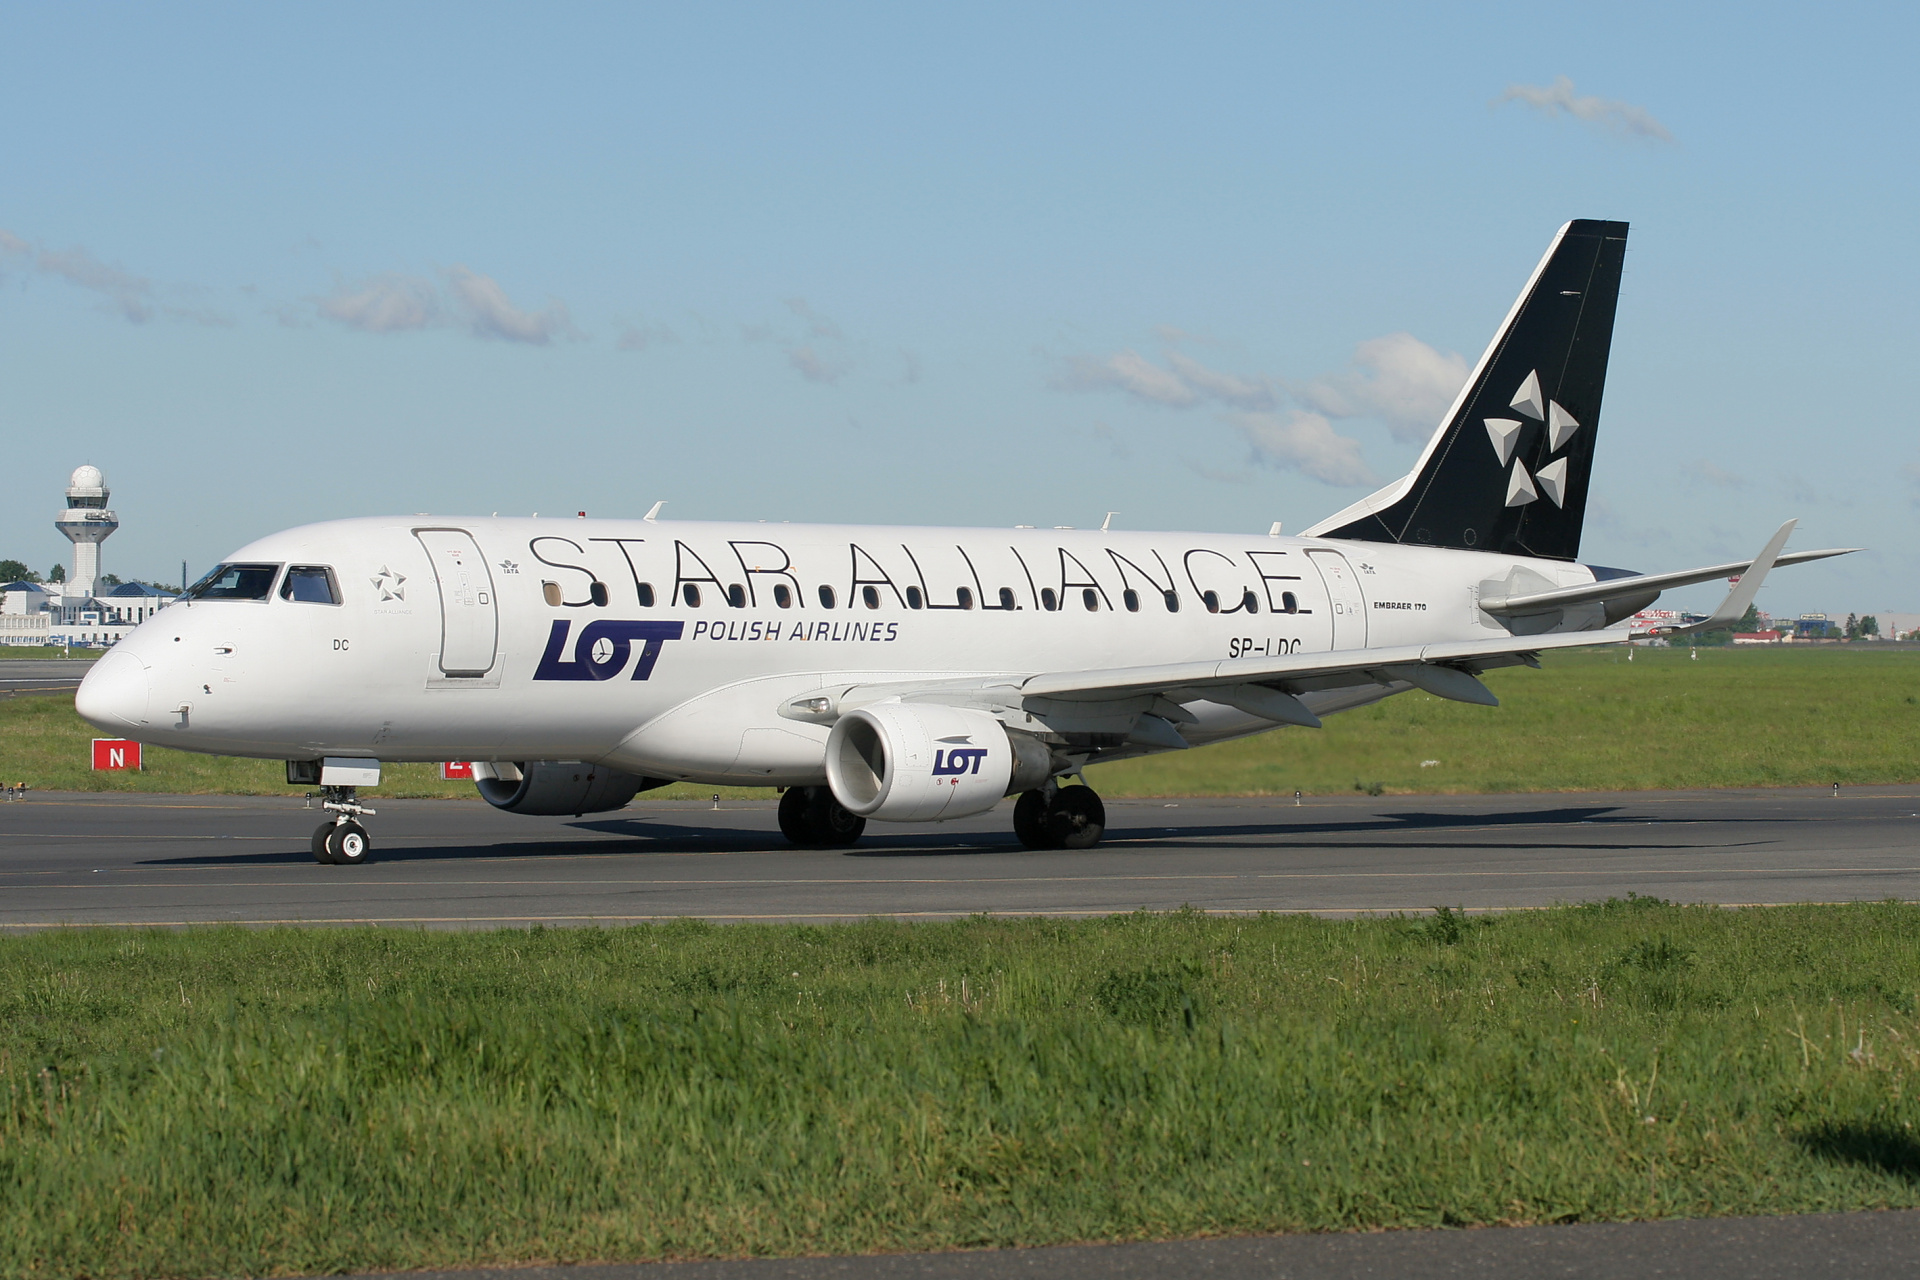 SP-LDC (Star Alliance livery) (Aircraft » EPWA Spotting » Embraer E170 » LOT Polish Airlines)